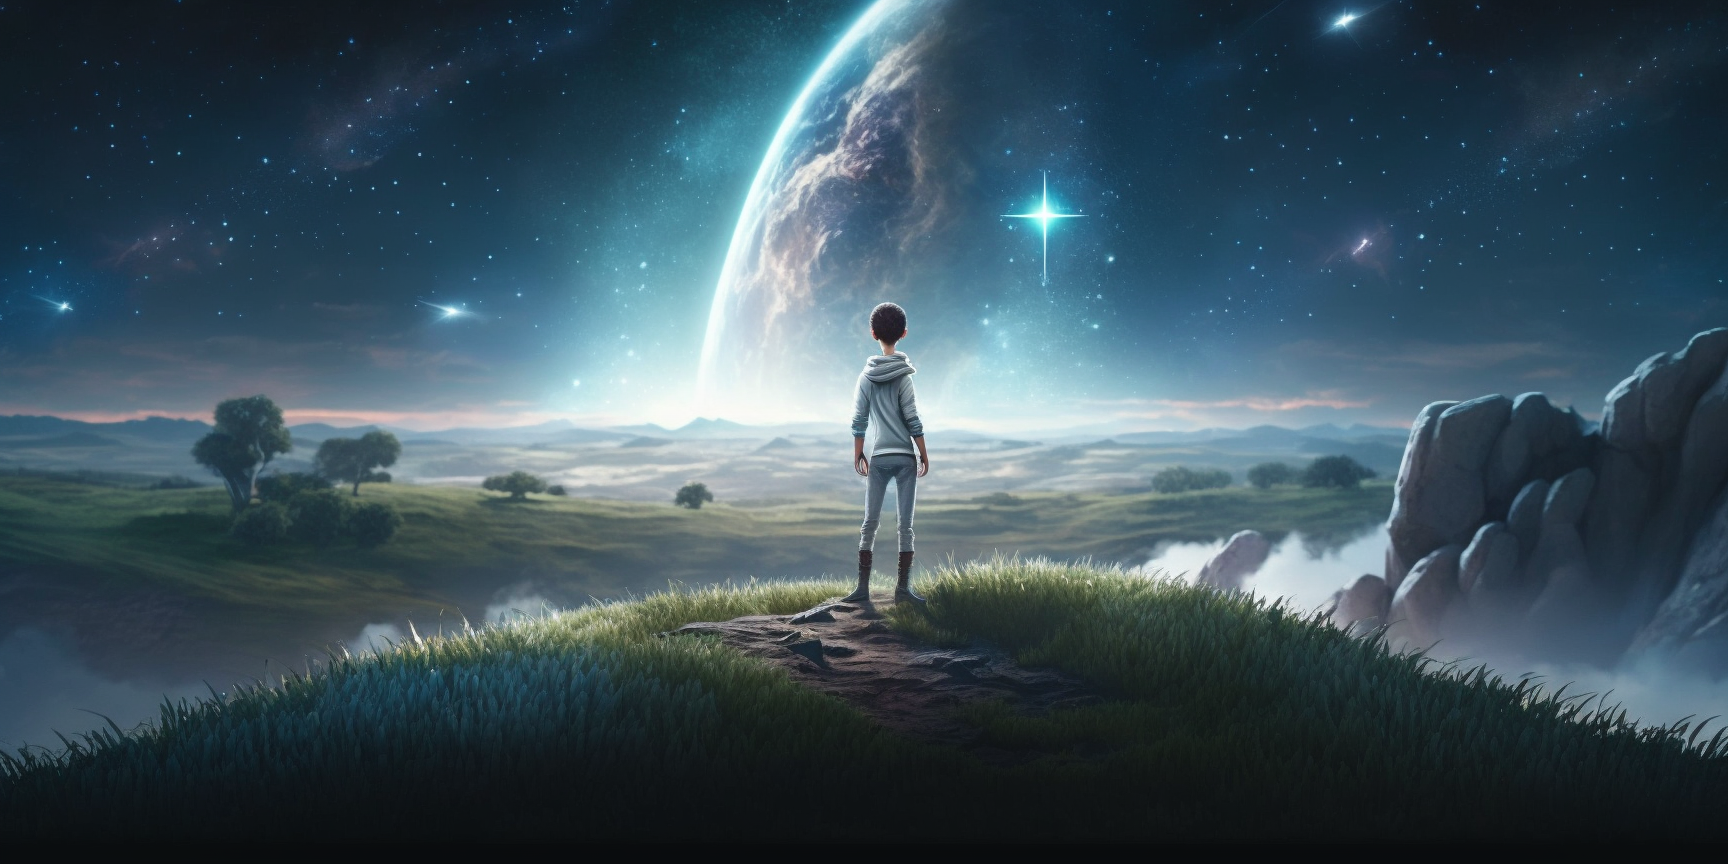 AI concept art of a boy staring at a sky with a bright star.